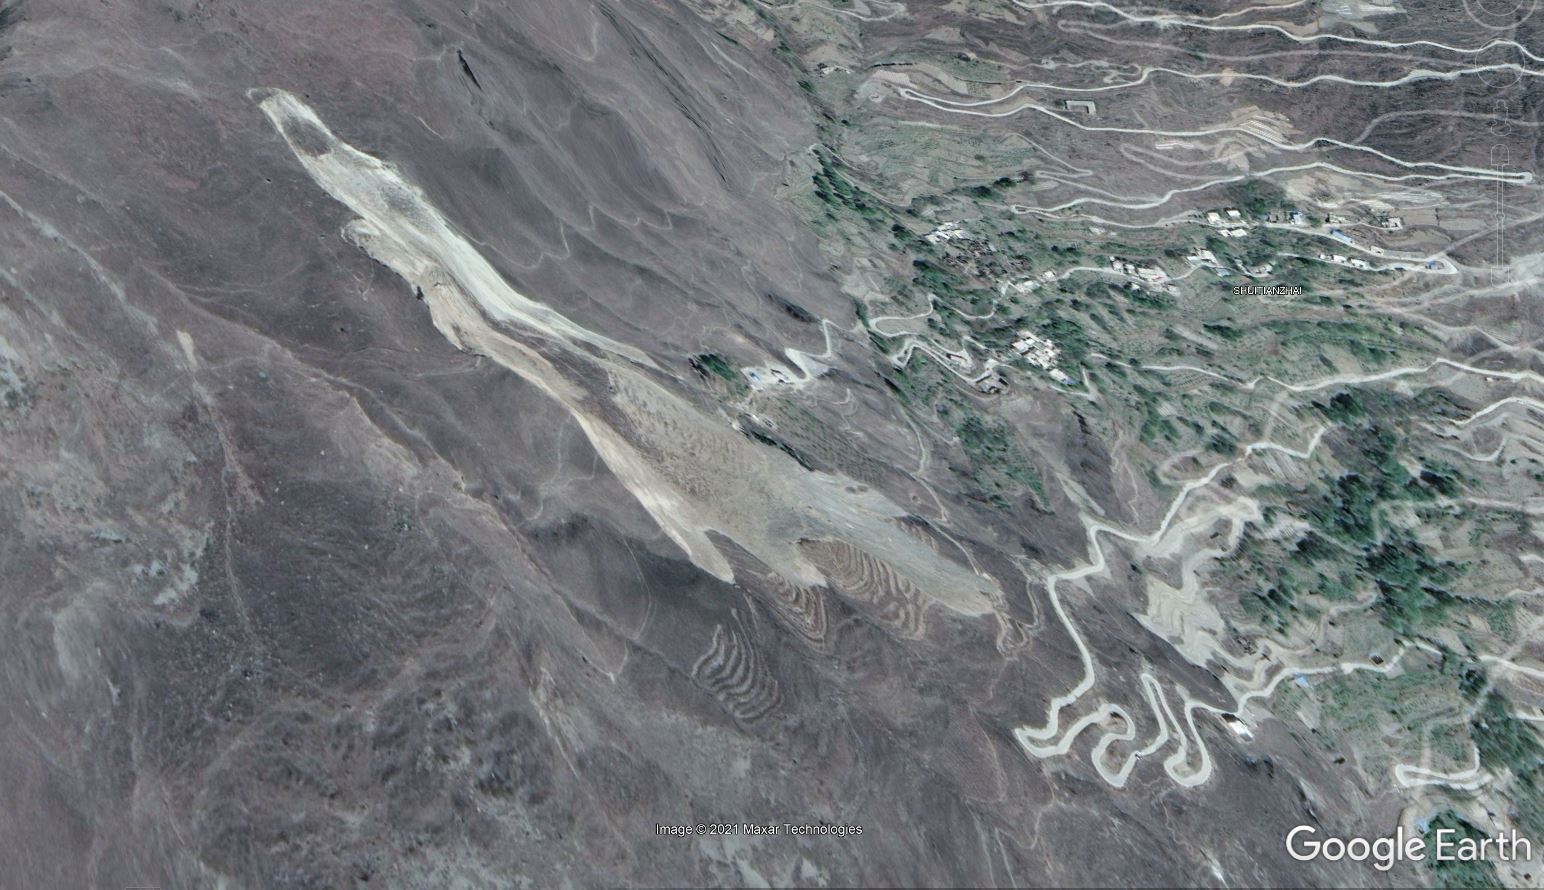 Google earth image showing the 8 August 2017 Tonghua landslide in Sichuan Province, China.